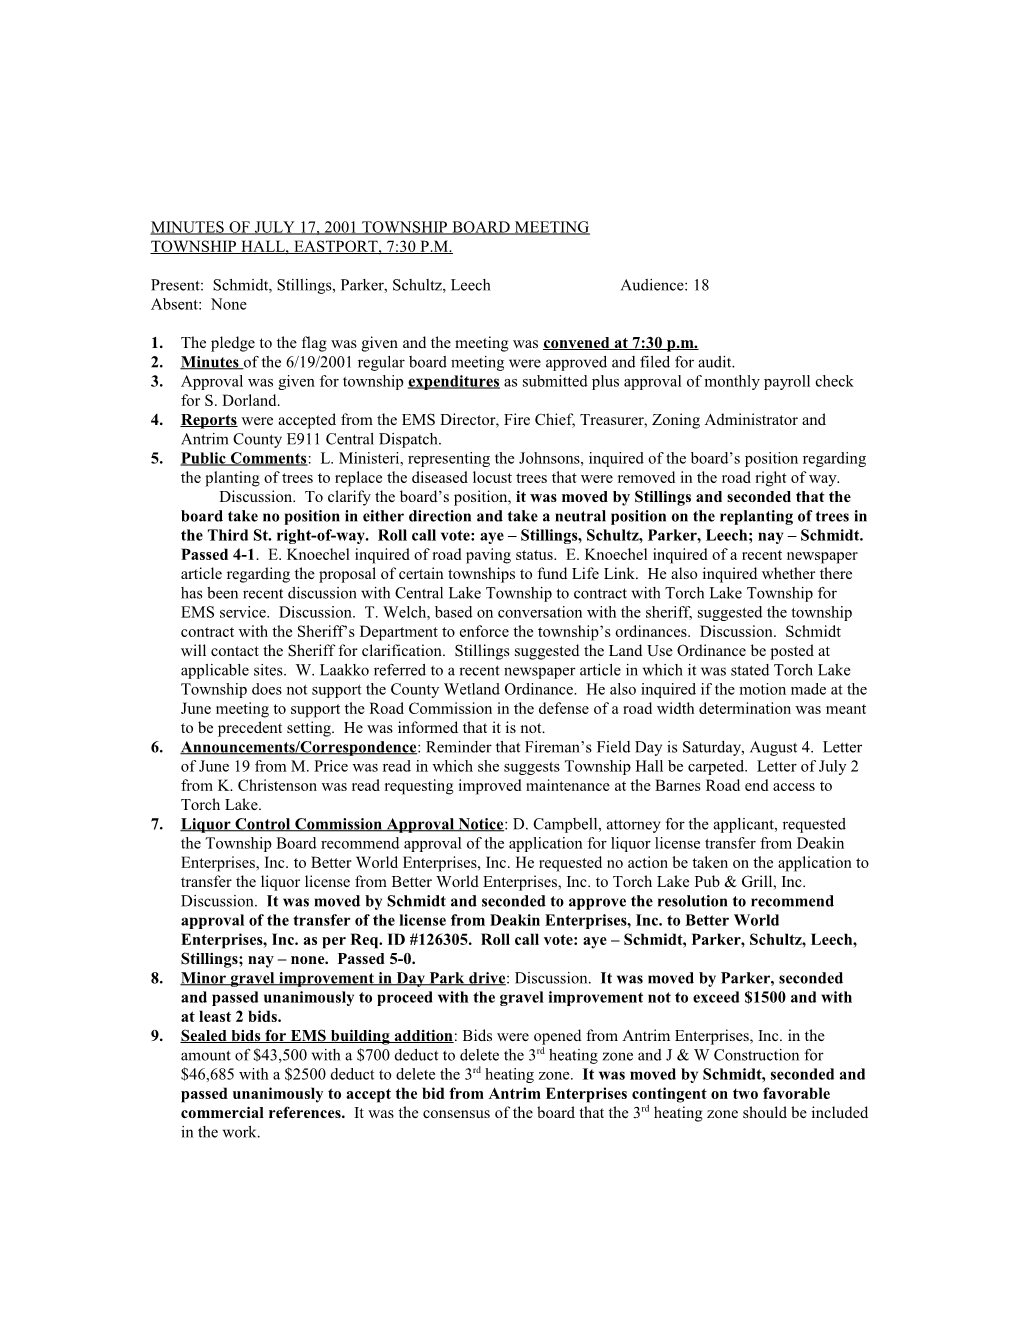 Minutes of July 17, 2001 Township Board Meeting